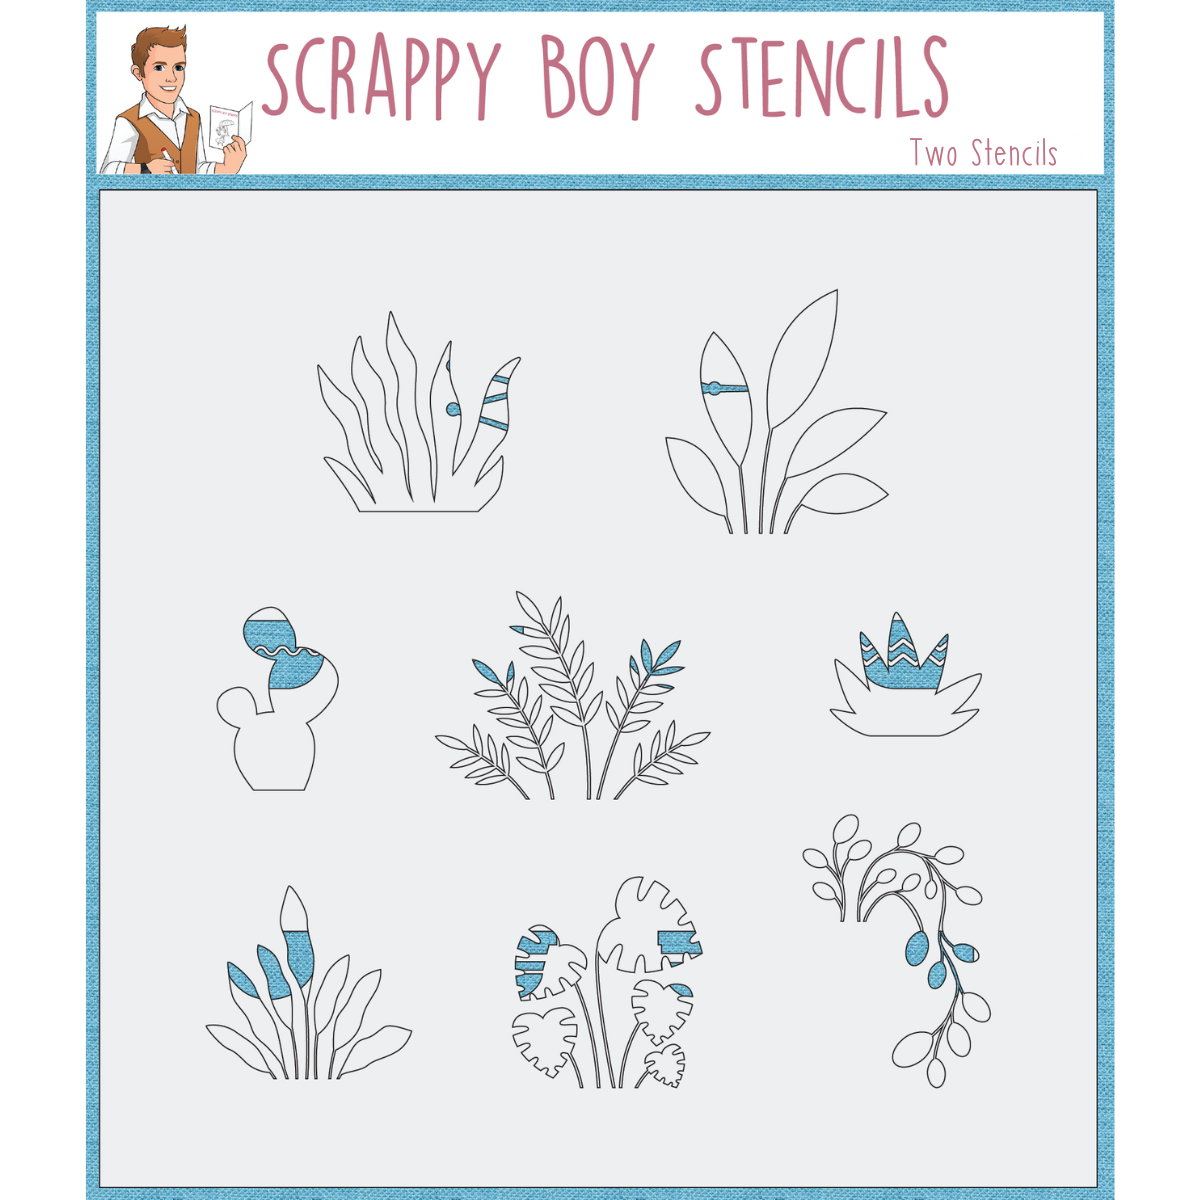 
                  
                    Core Bundle - Cute Girls Plant Lovers Release scrappyboystamps
                  
                